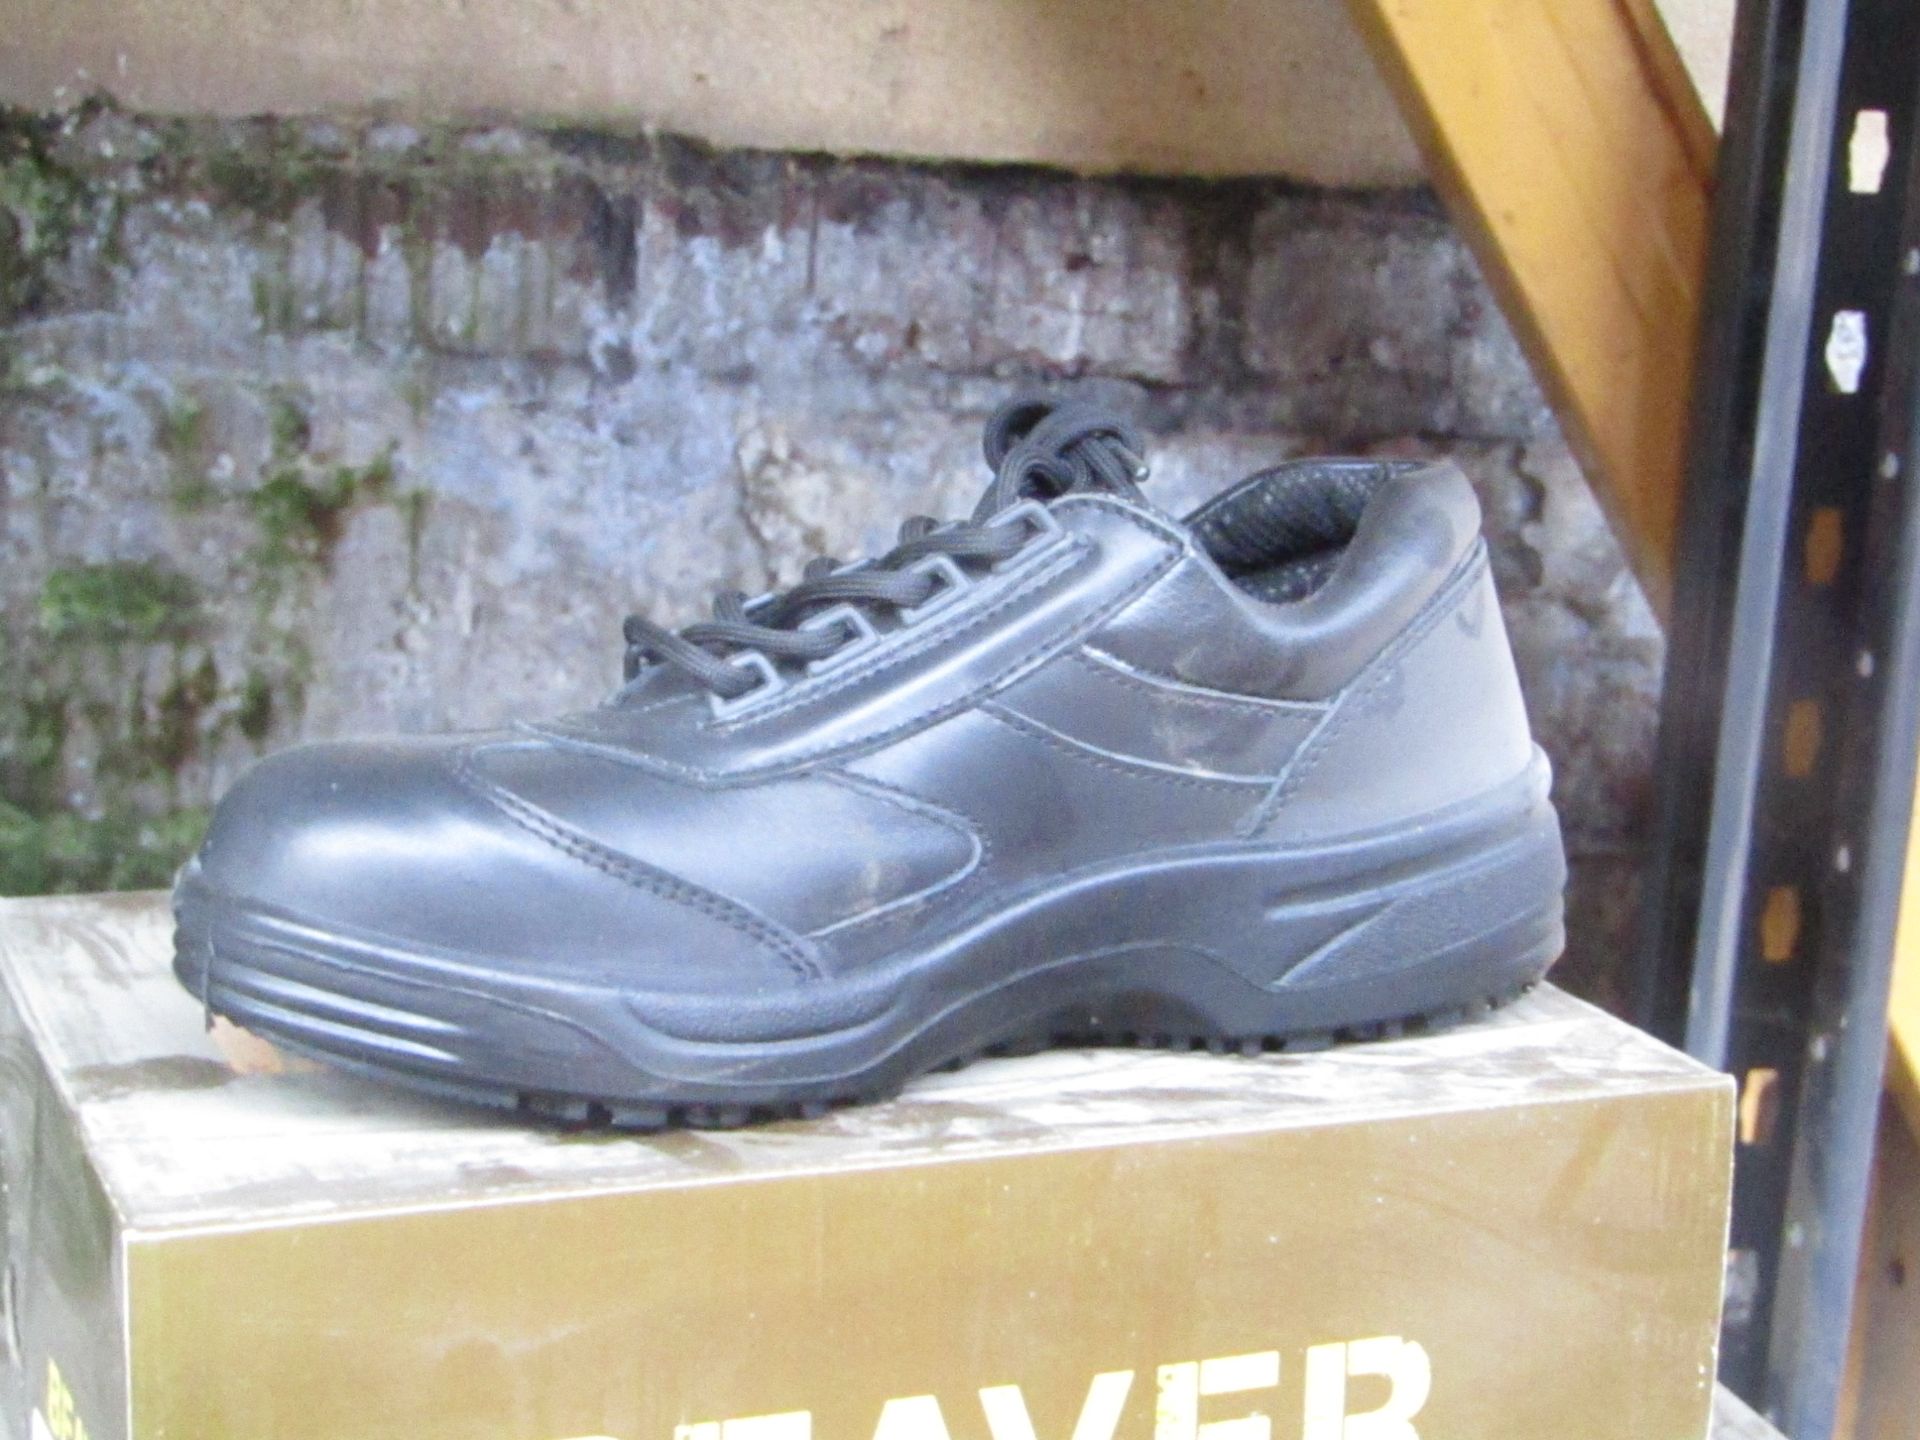 Beaver Steel Toe Cap safety Trainer Shoes, new size 5 RRP £23.99